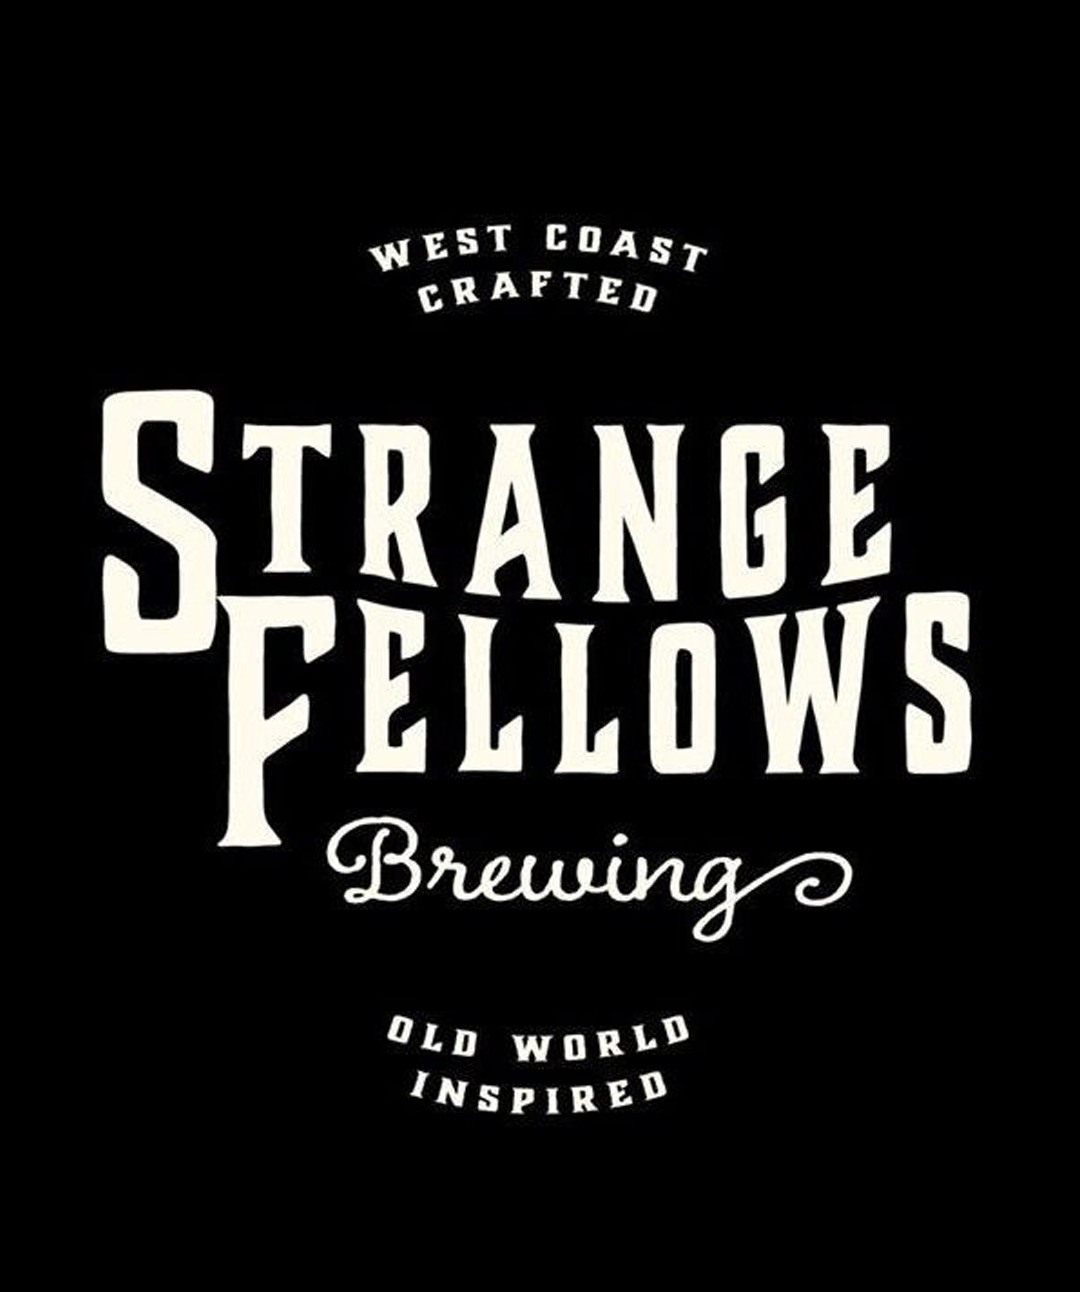 ABOUT STRANGE FELLOWS BREWING